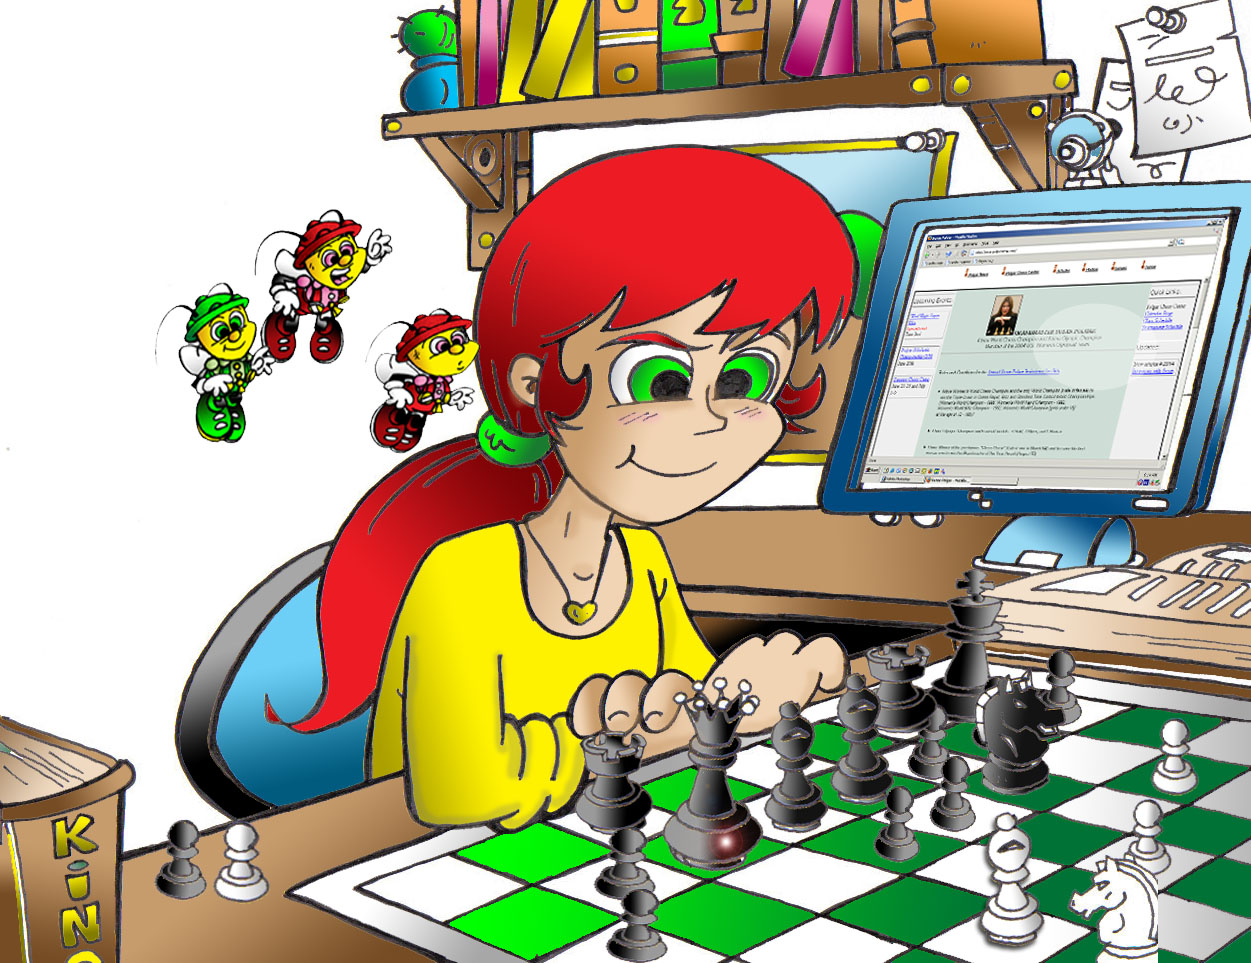 The Queen of Chess: How Judit Polgár Changed the Game - little bee books